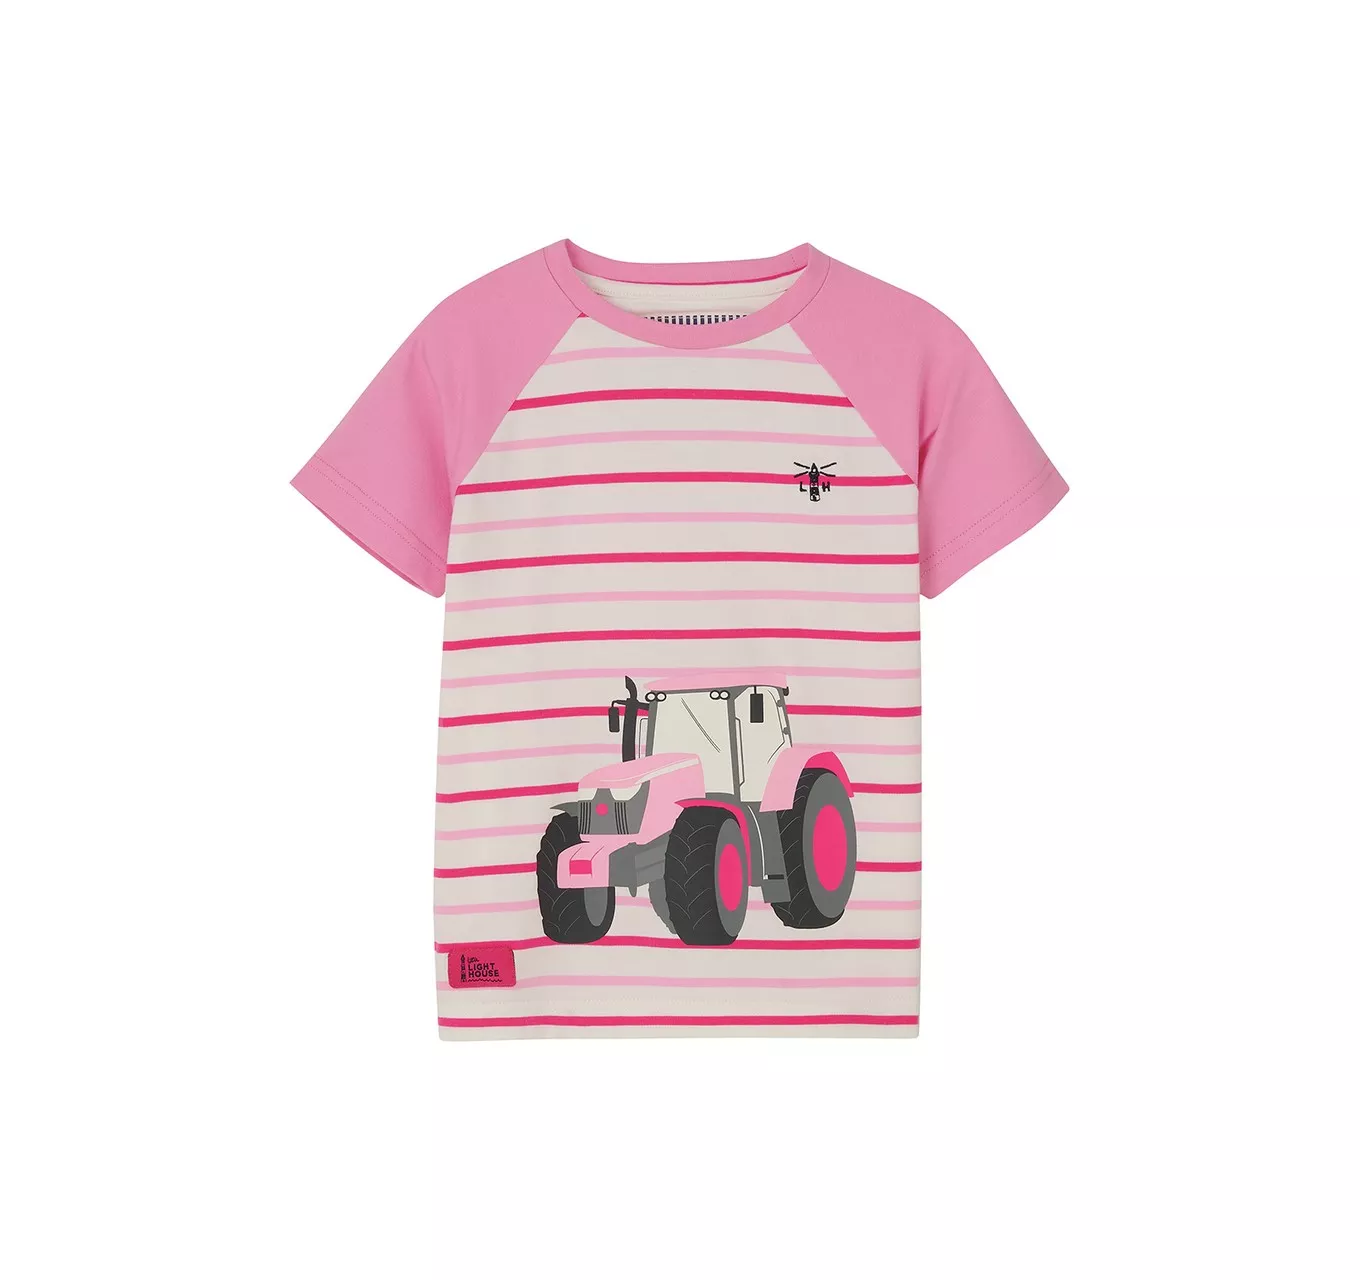 Tractor T-Shirt Sweet Pea 6-7